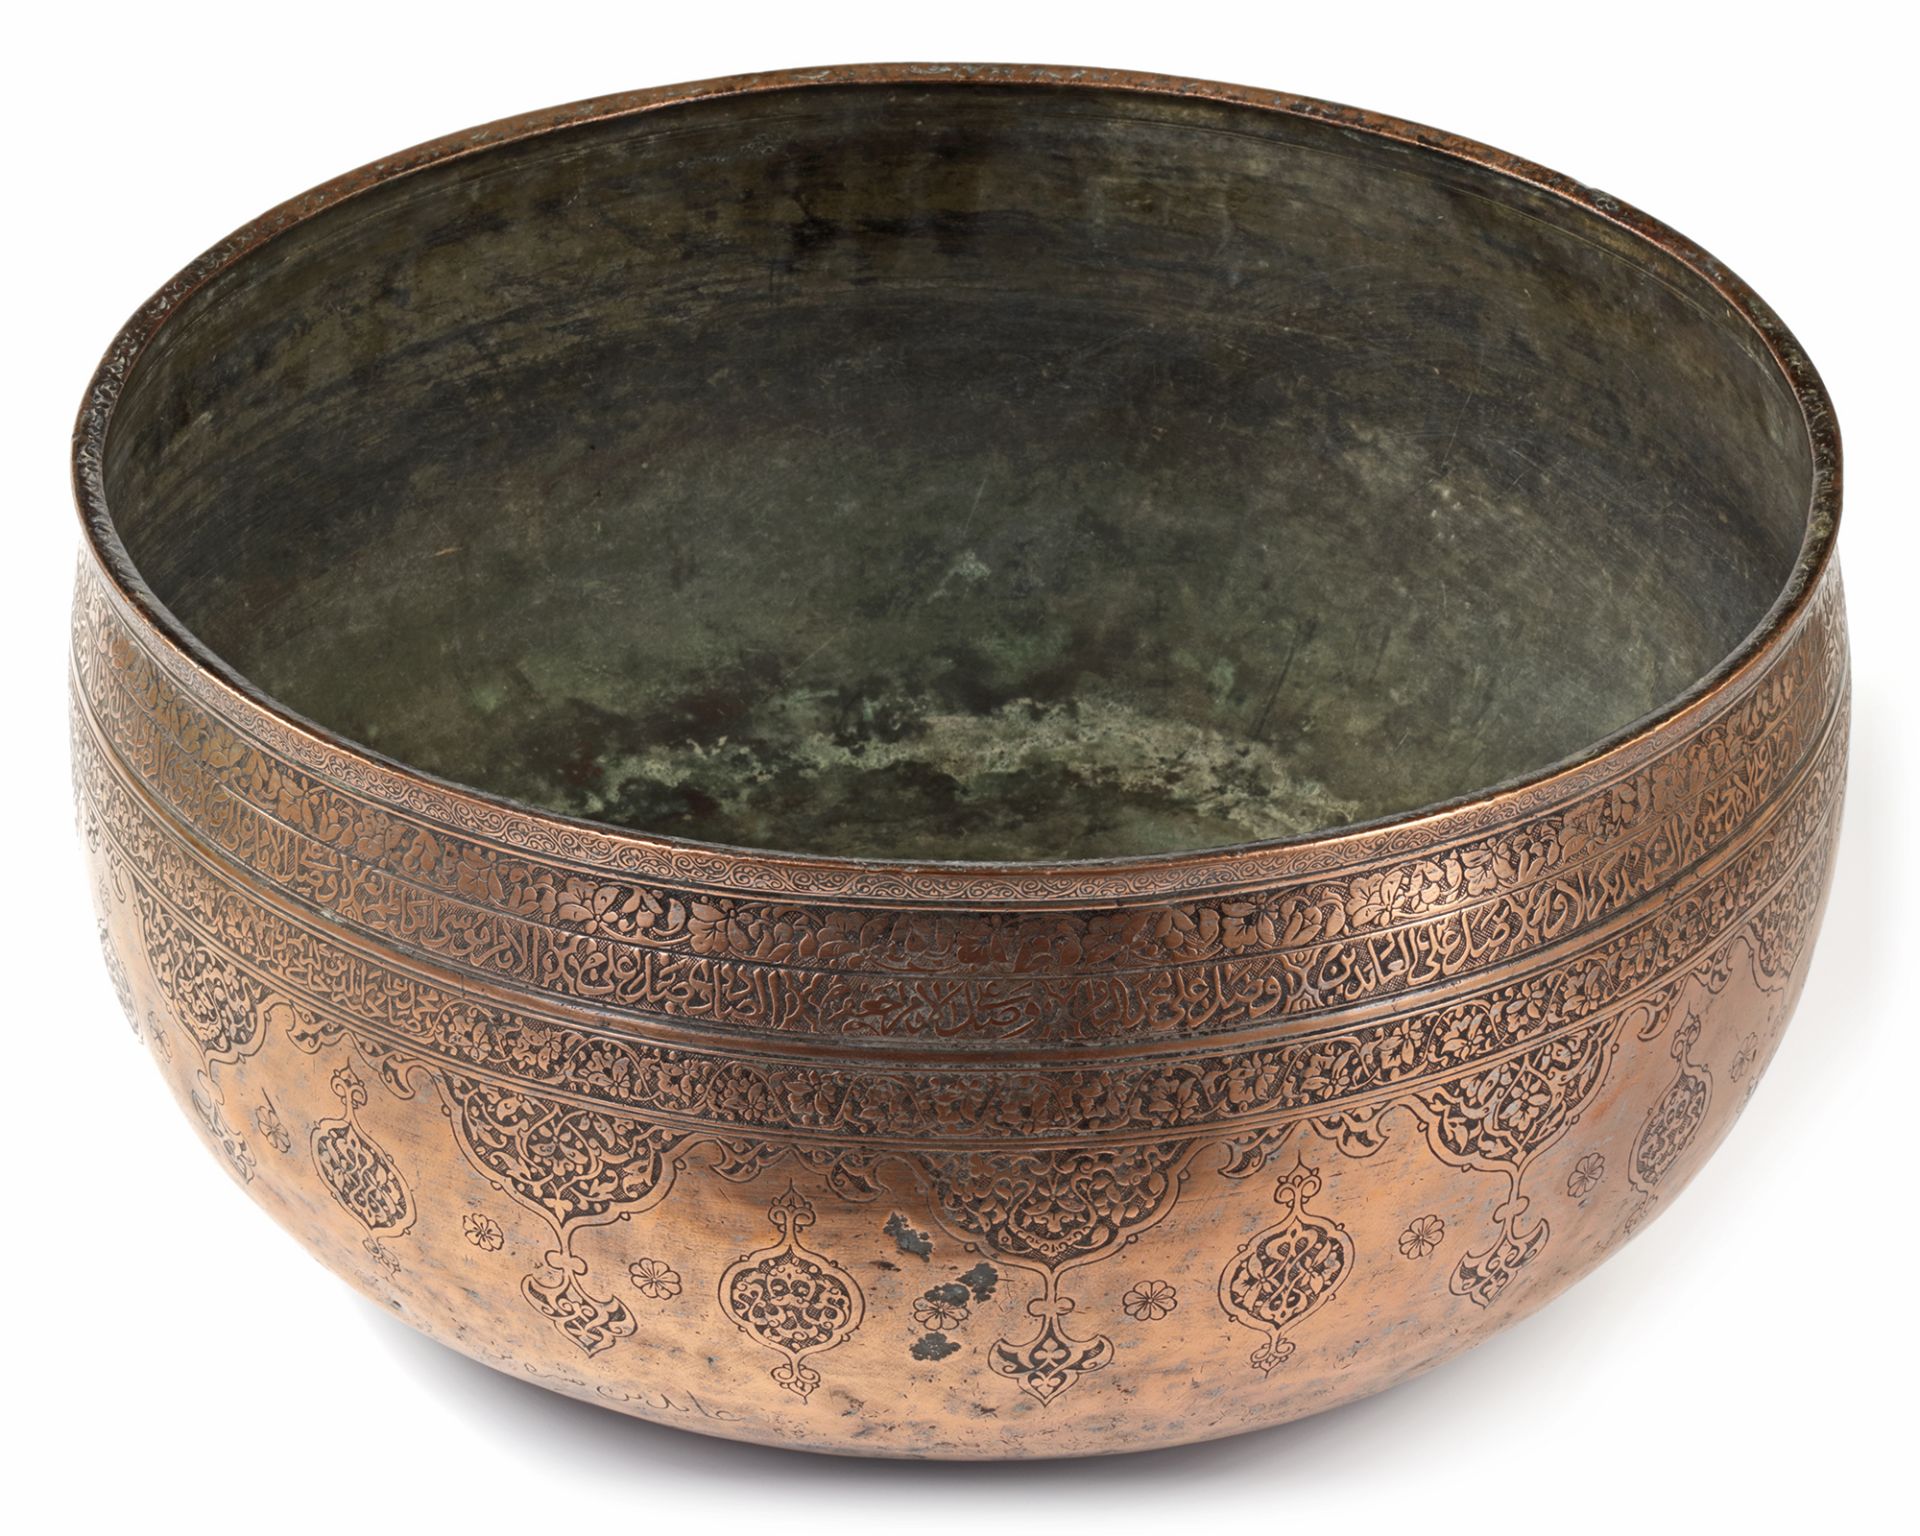 A MONUMENTAL LATE TIMURID ENGRAVED COPPER BOWL CENTRAL ASIA, LATE 15TH-EARLY 16TH CENTURY - Image 5 of 6